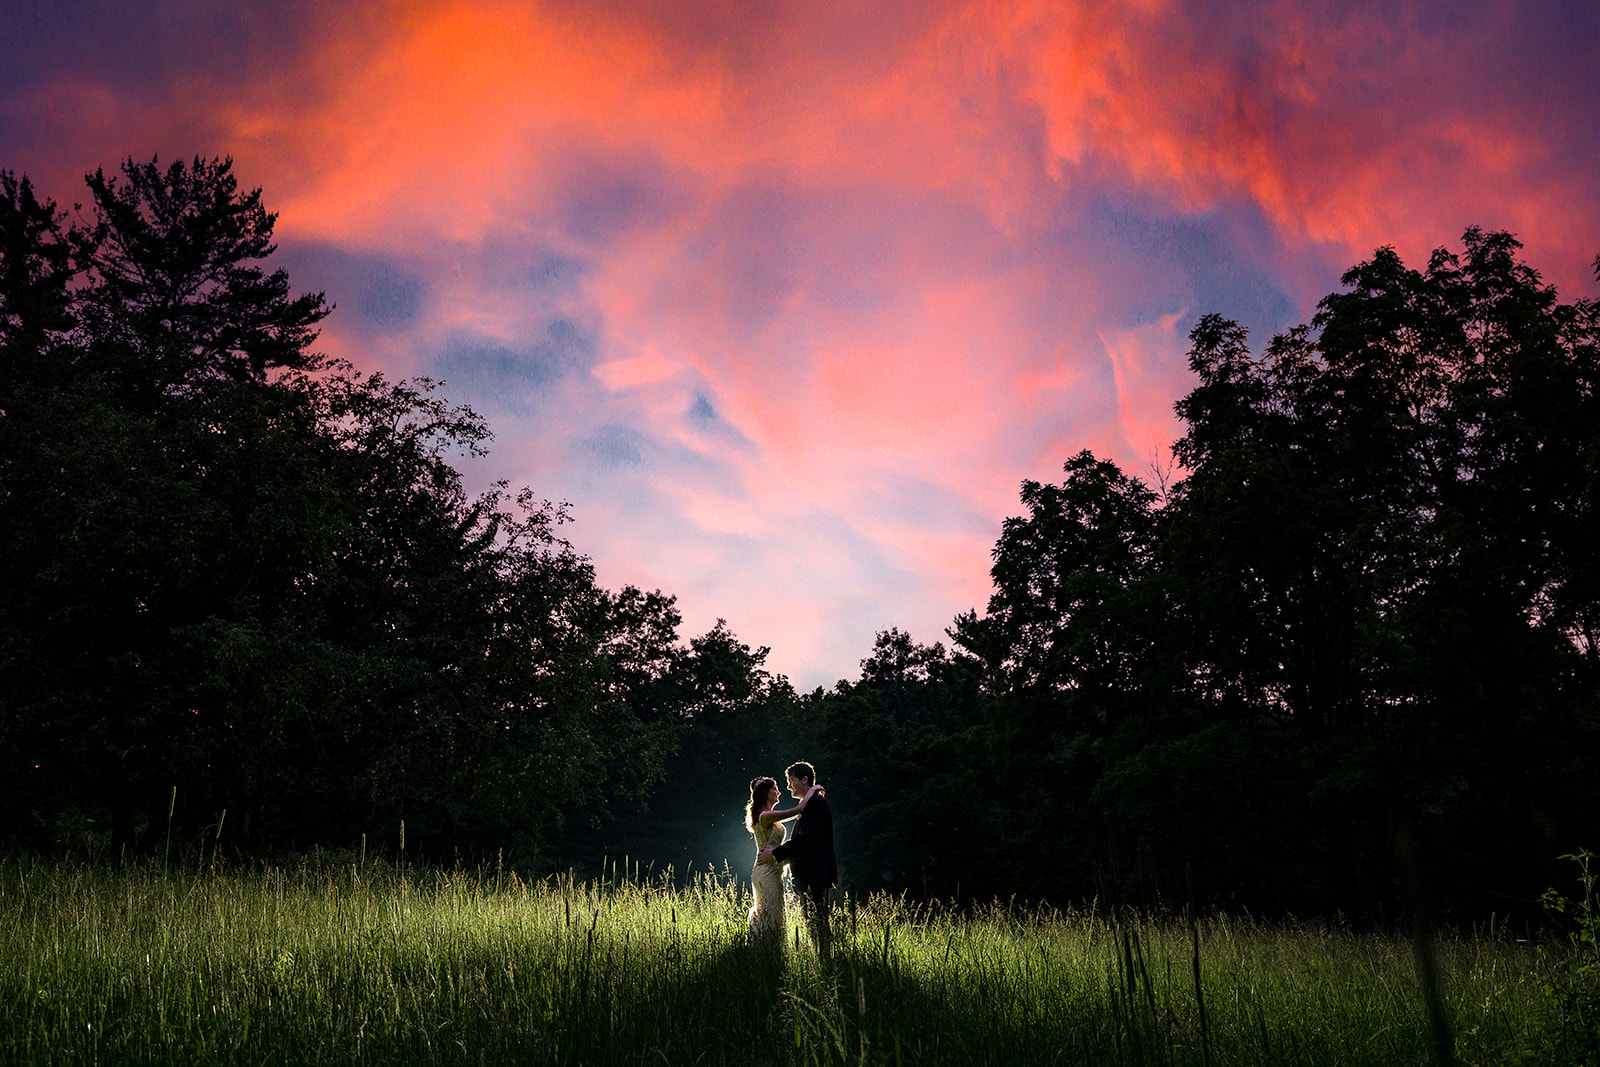 Winnebago Springs Dream Wedding, Caledonia, MN by La Crosse photographer, Jeff Wiswell of J L Wiswell Photography